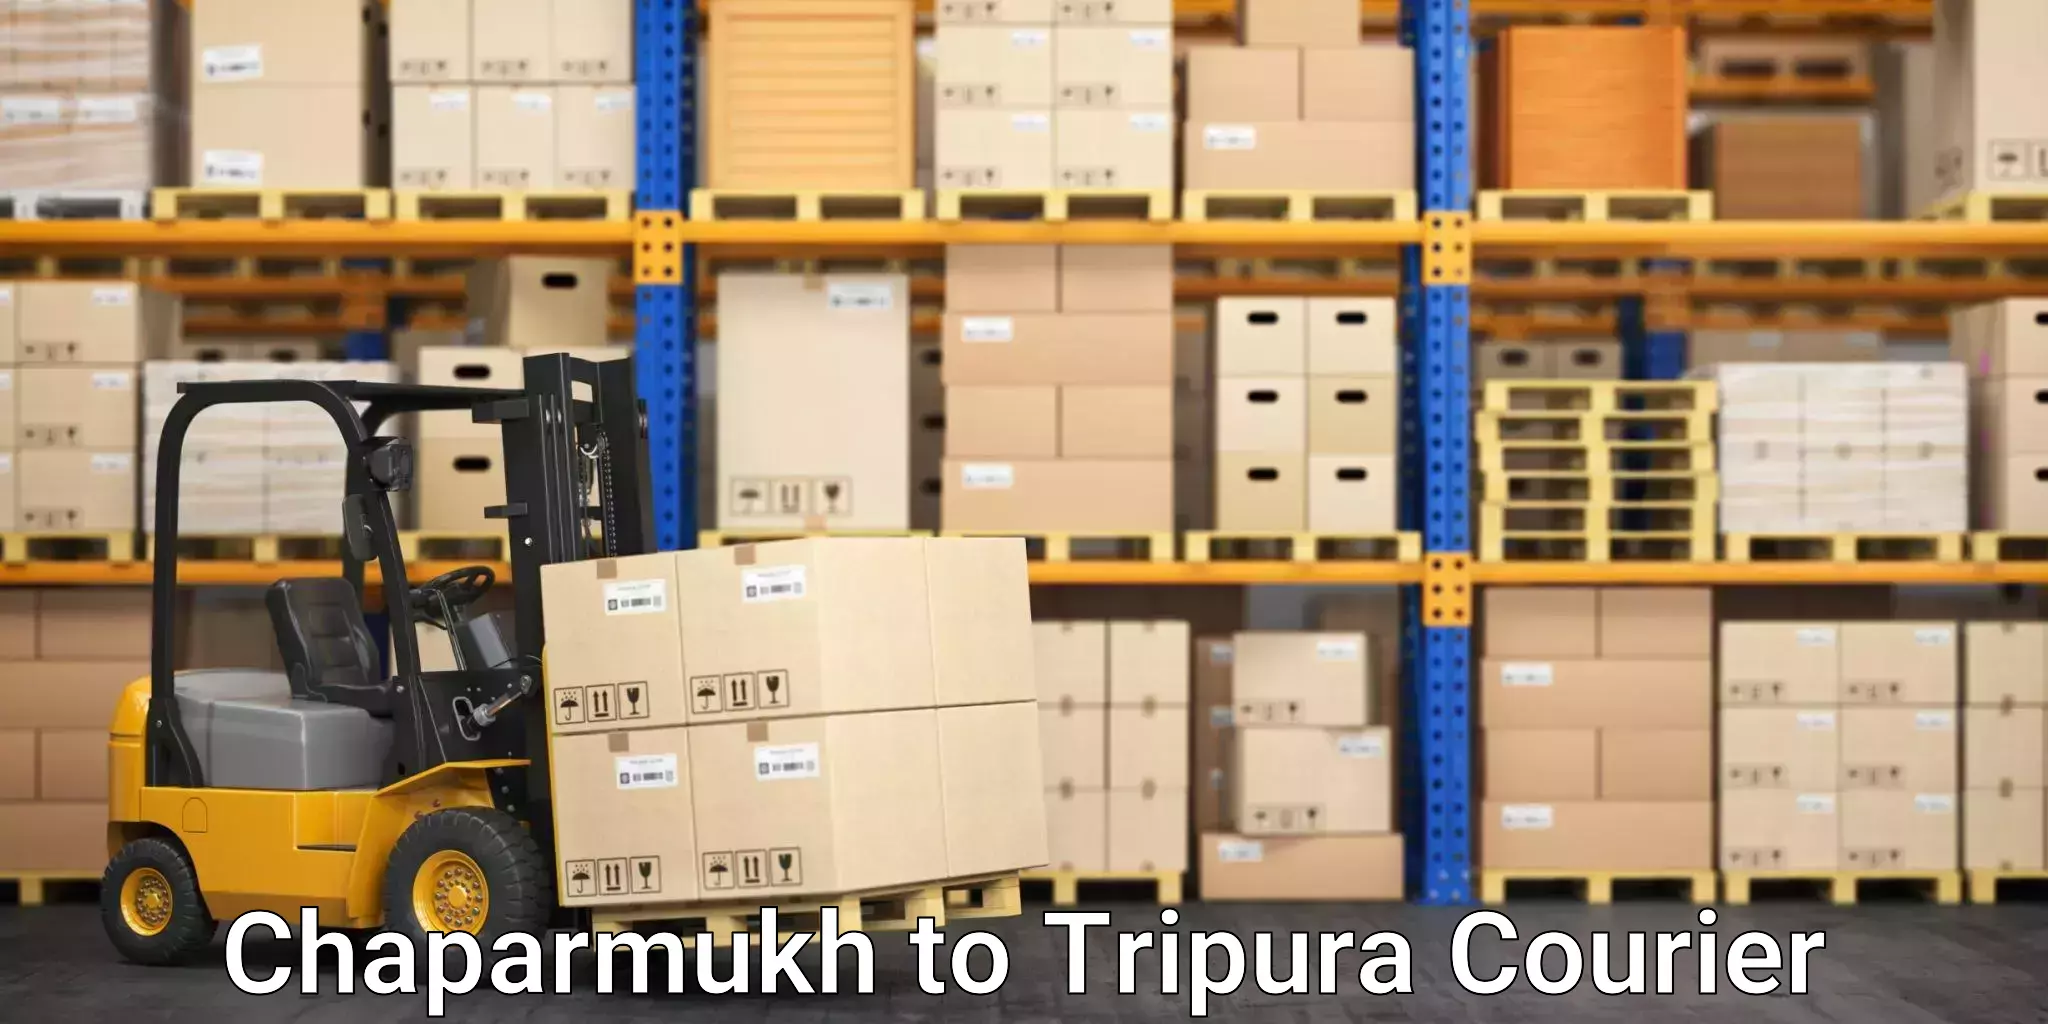 Express delivery network Chaparmukh to Tripura